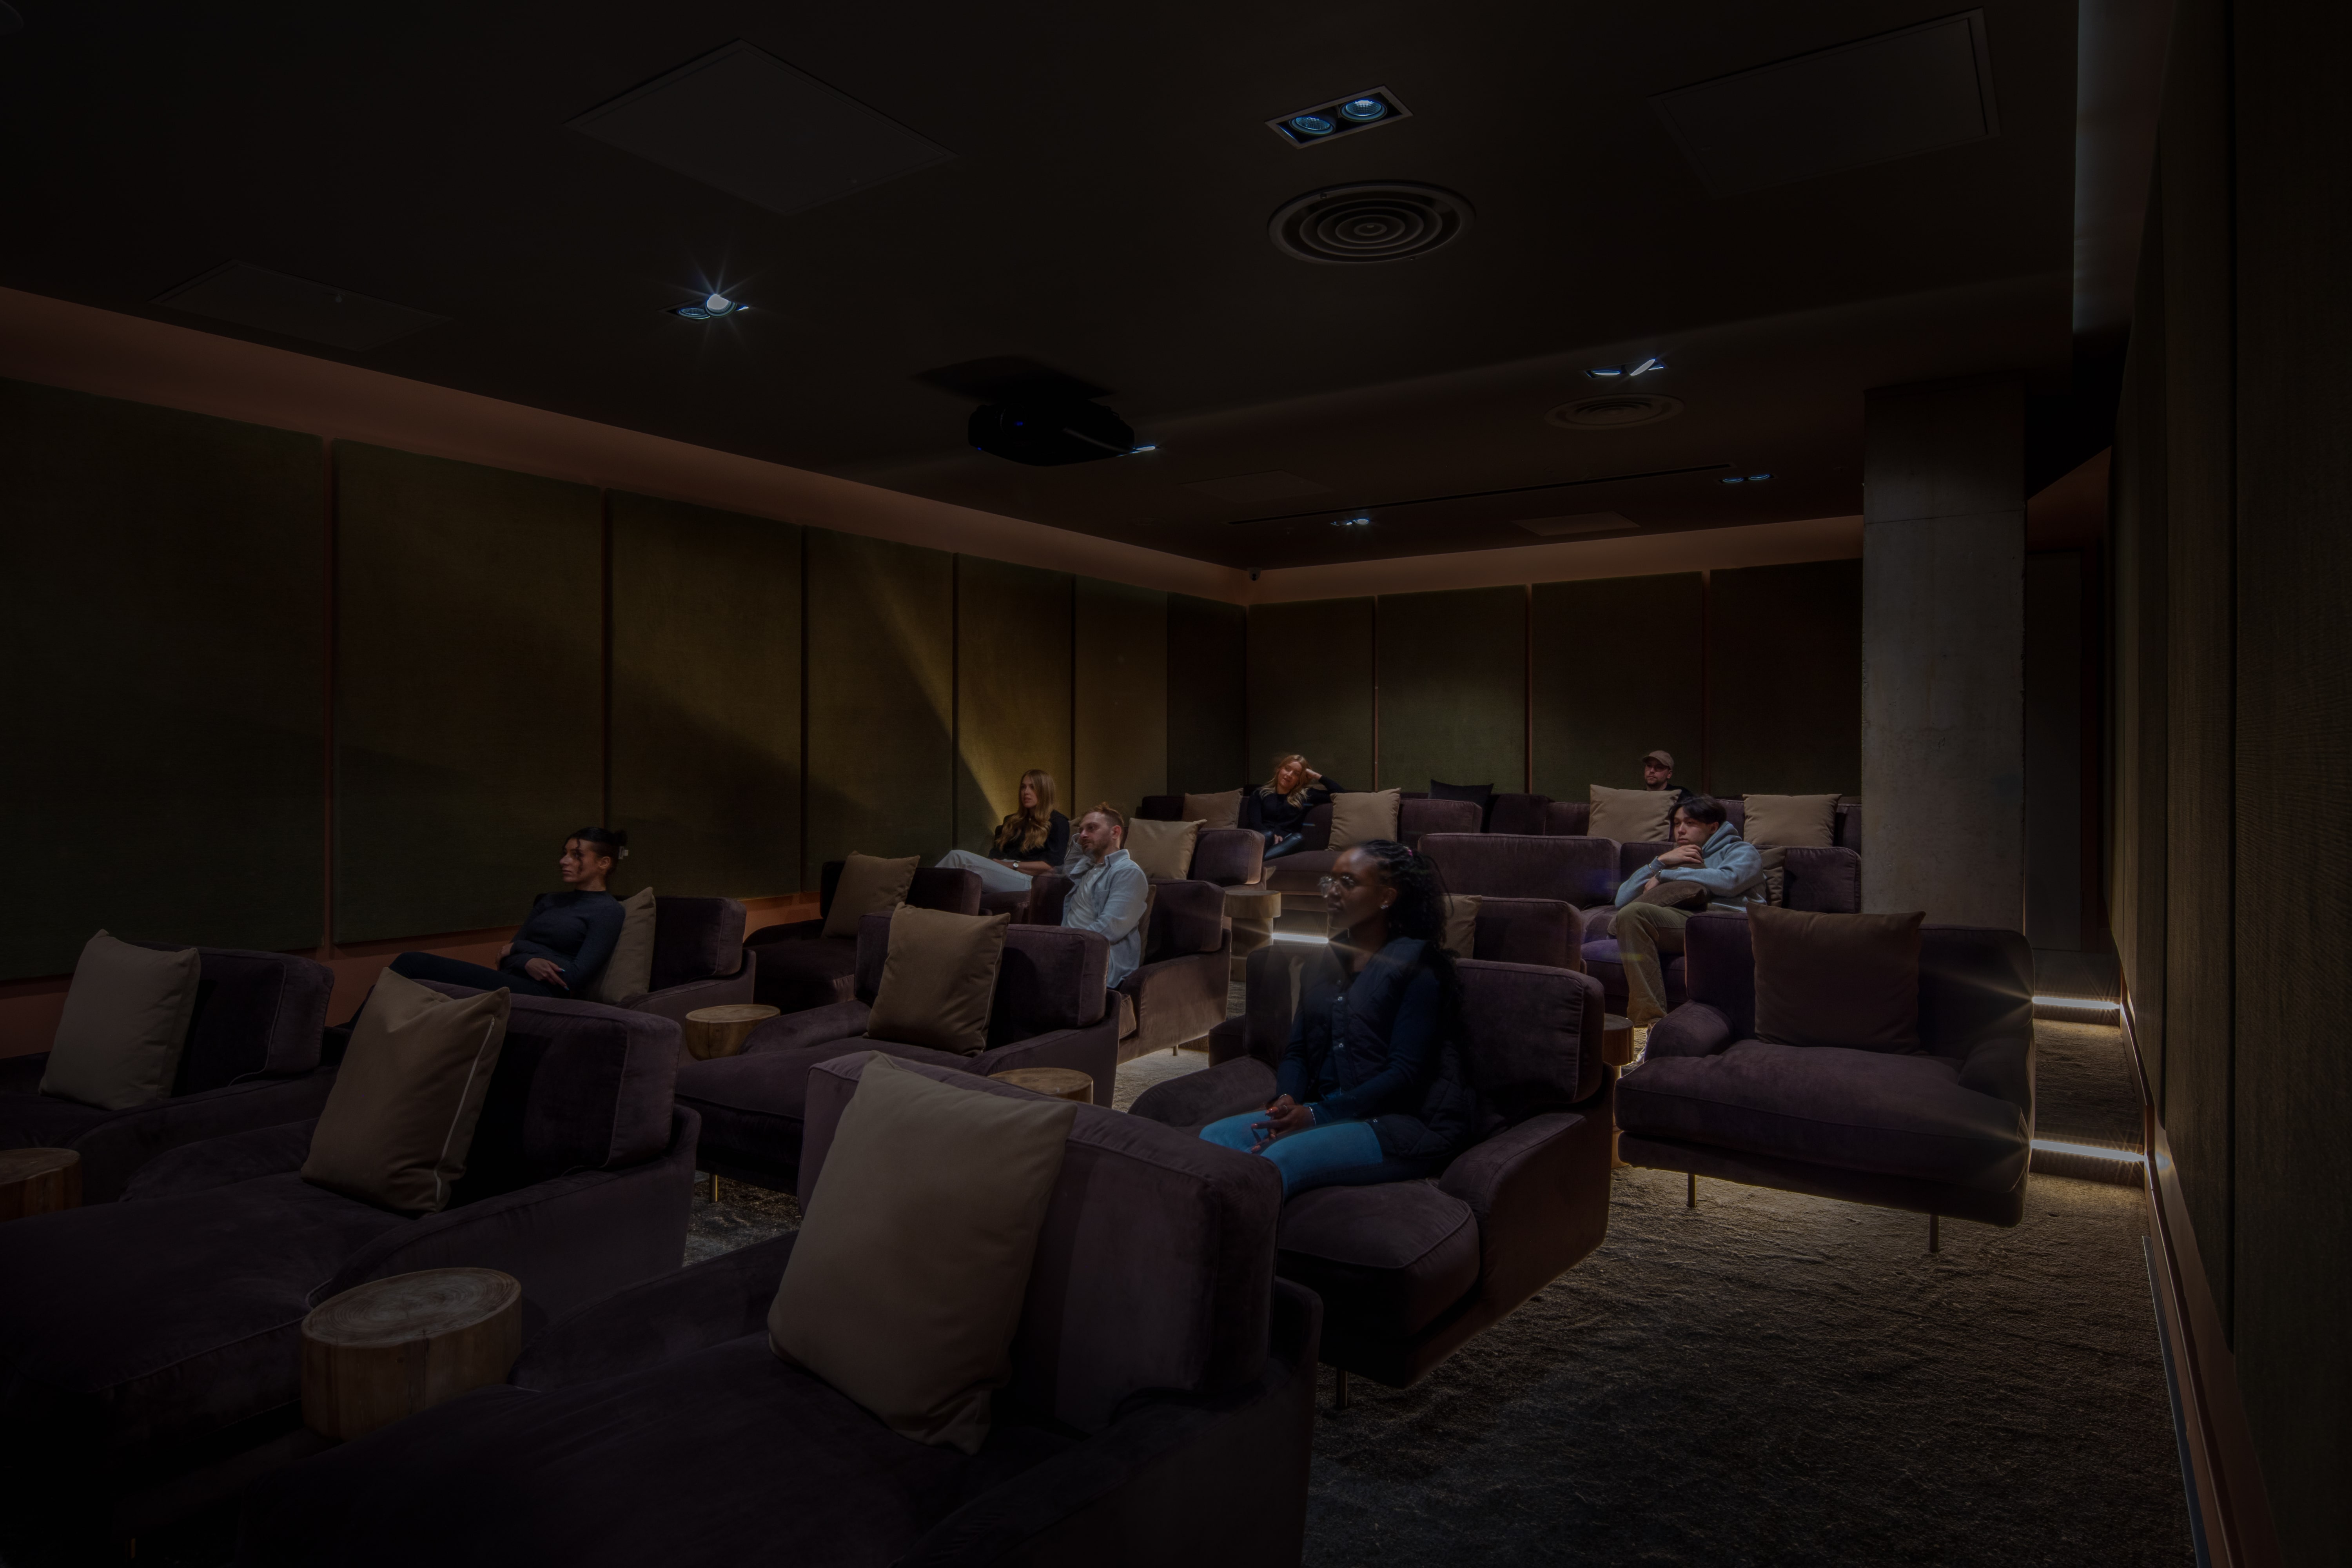 Get lost in the latest episode of your favourite series in the screening room